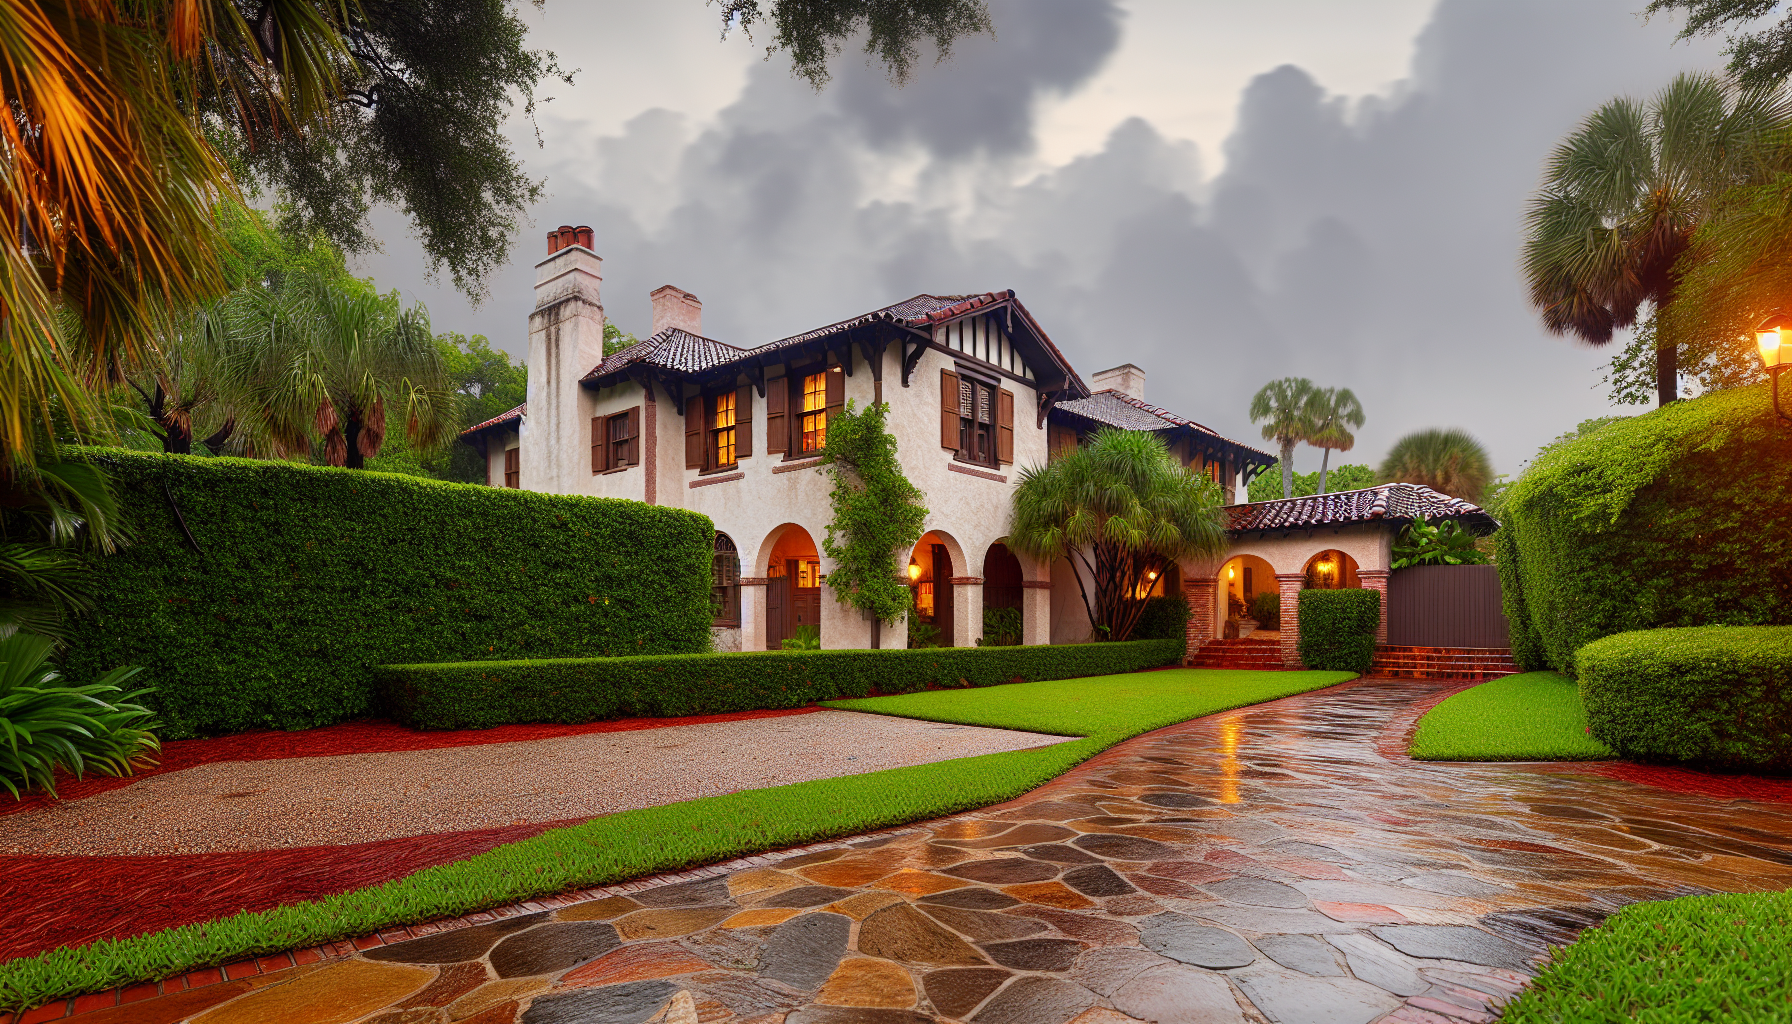 Historic home in Fort Lauderdale